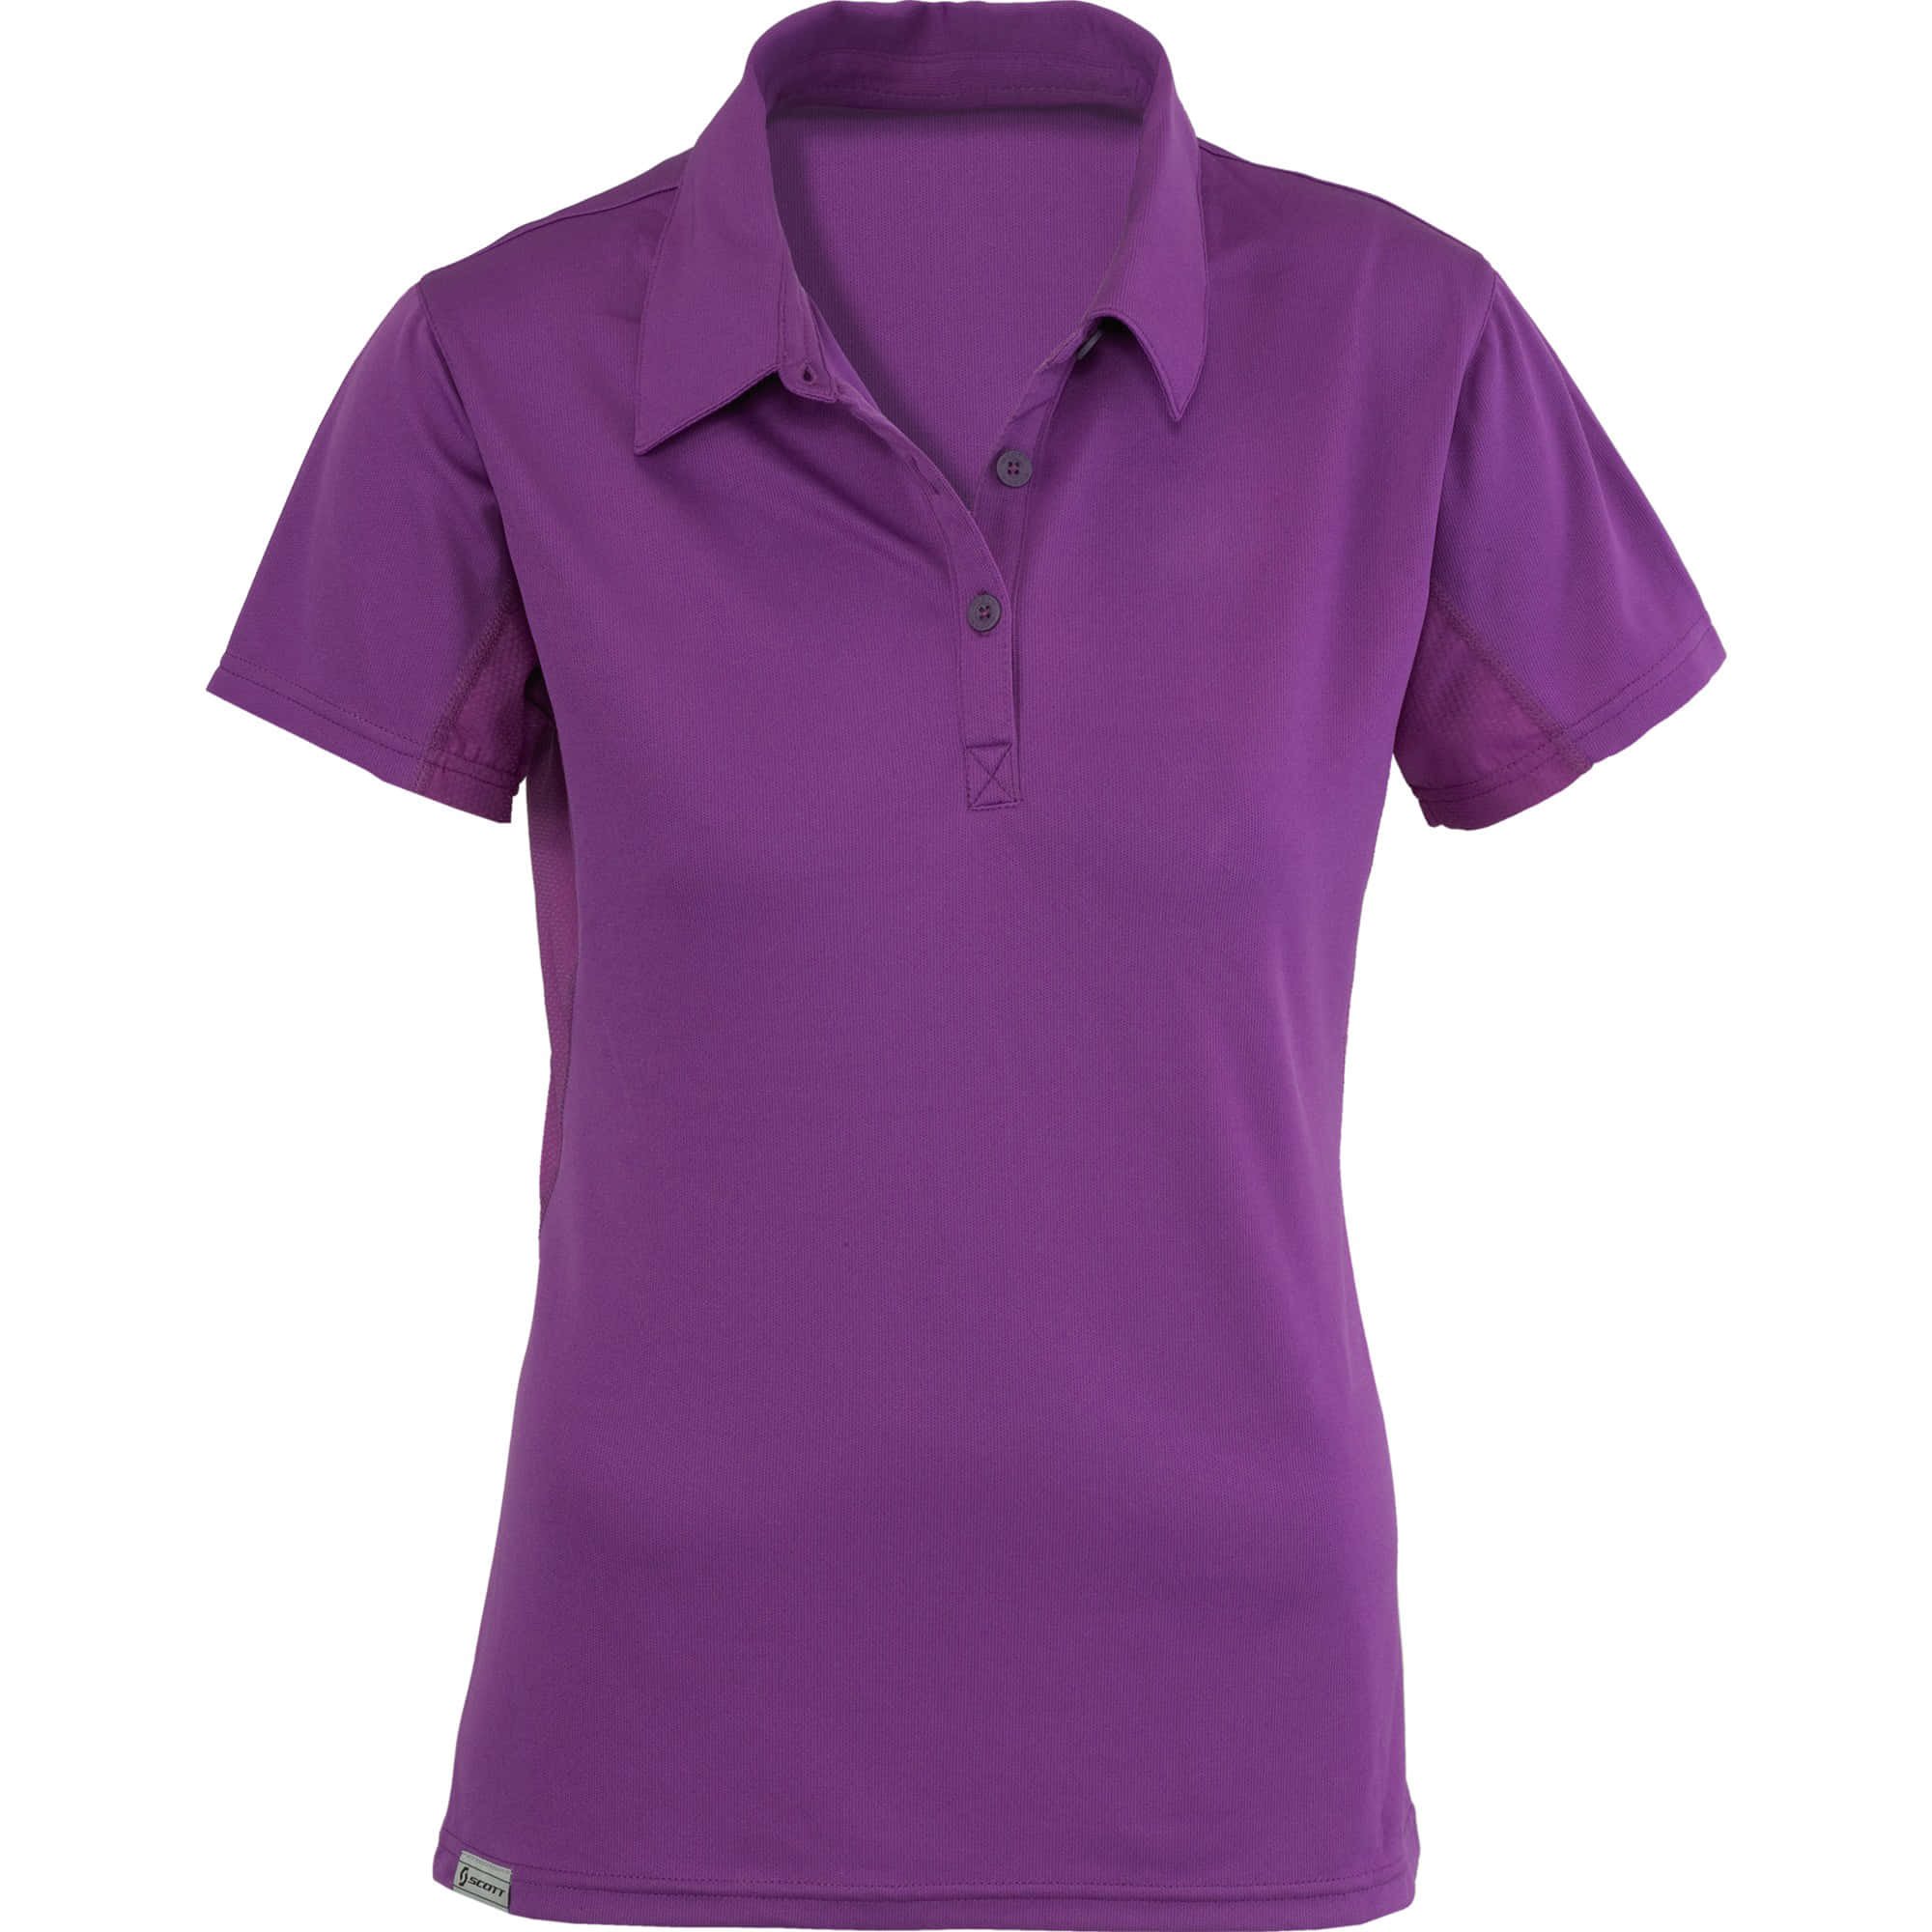 Look Stylish and Trendy with this Gorgeous Purple Shirt! Wallpaper